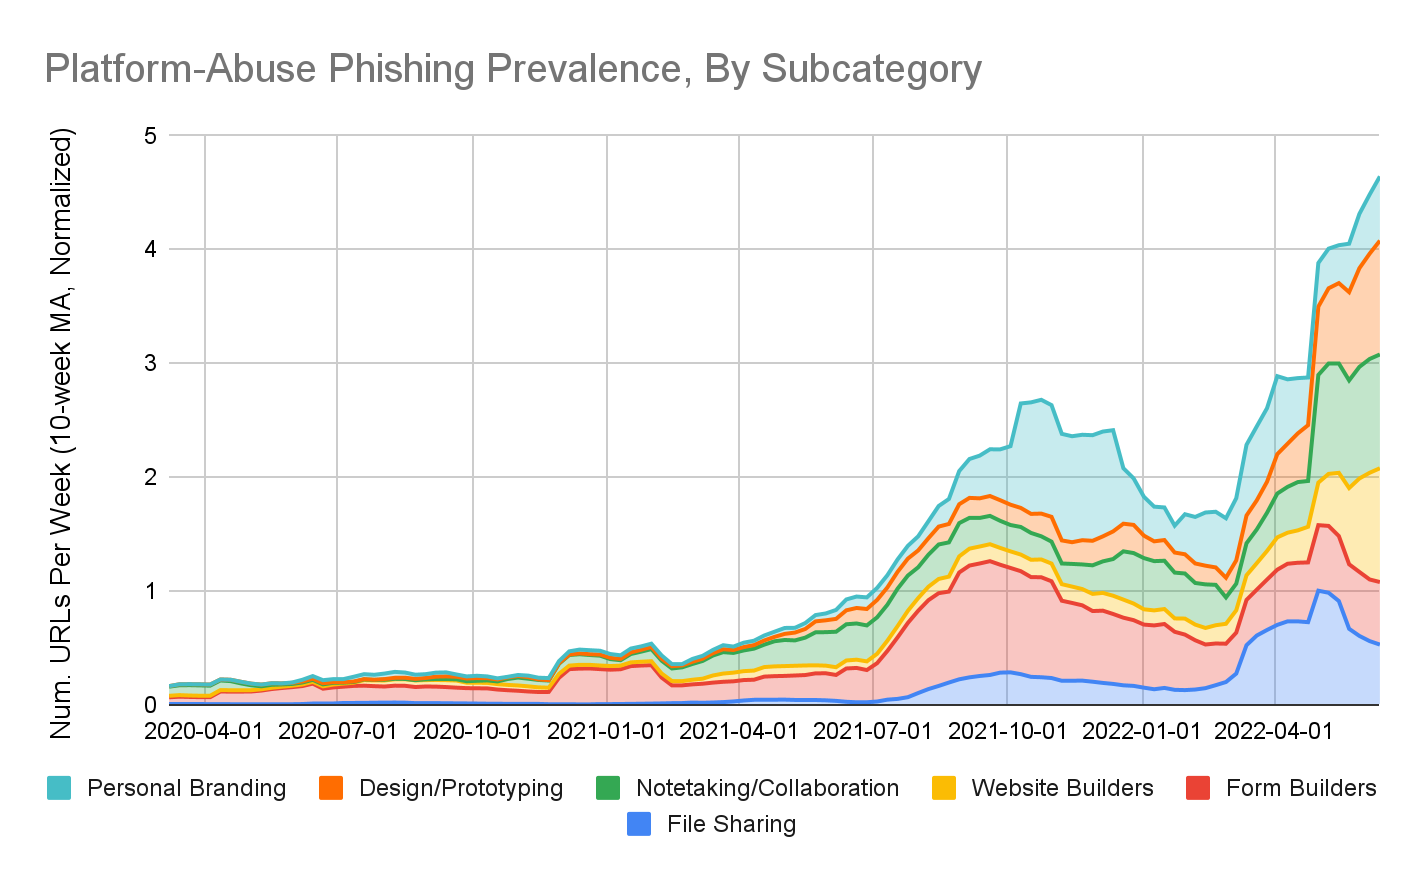 Platform-Abuse Phishing Prevalence, By Subcategory. Light blue = personal branding, orange = design/prototyping, green = notetaking/collaboration, yellow = website builders, red = form builders, blue = file sharing. Period covered is April 2020-April 2022. Chart shows number of URLs per week in terms of a 10-week moving average, normalized, with a notable spike at the end of the period shown. 